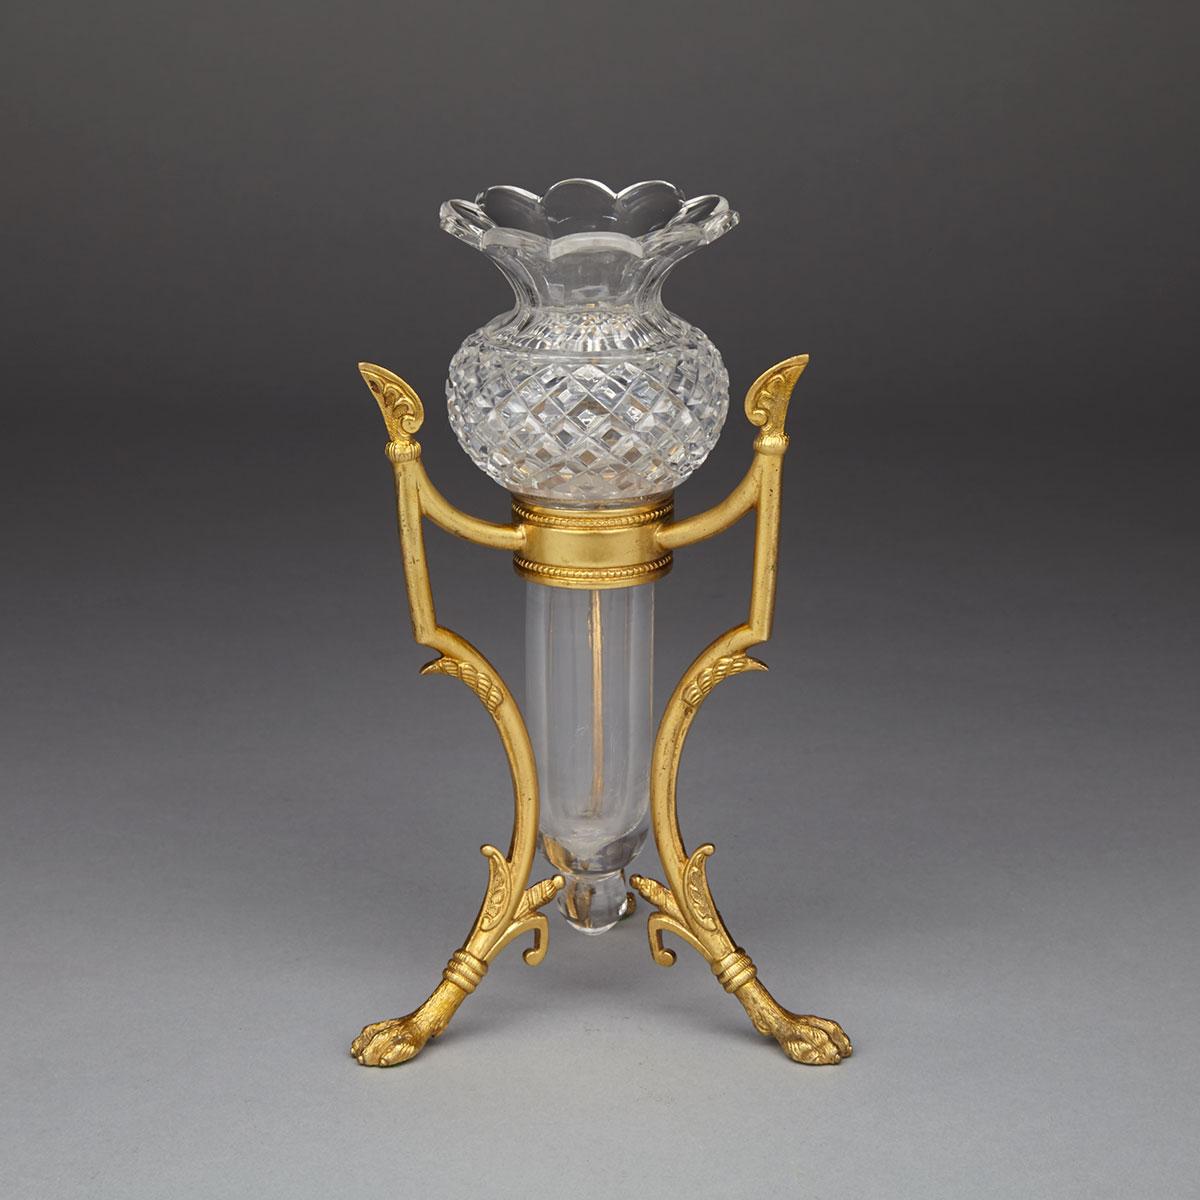 French Aesthetic Movement Cut Glass Bud Vase on Ormolu Stand, c.1870